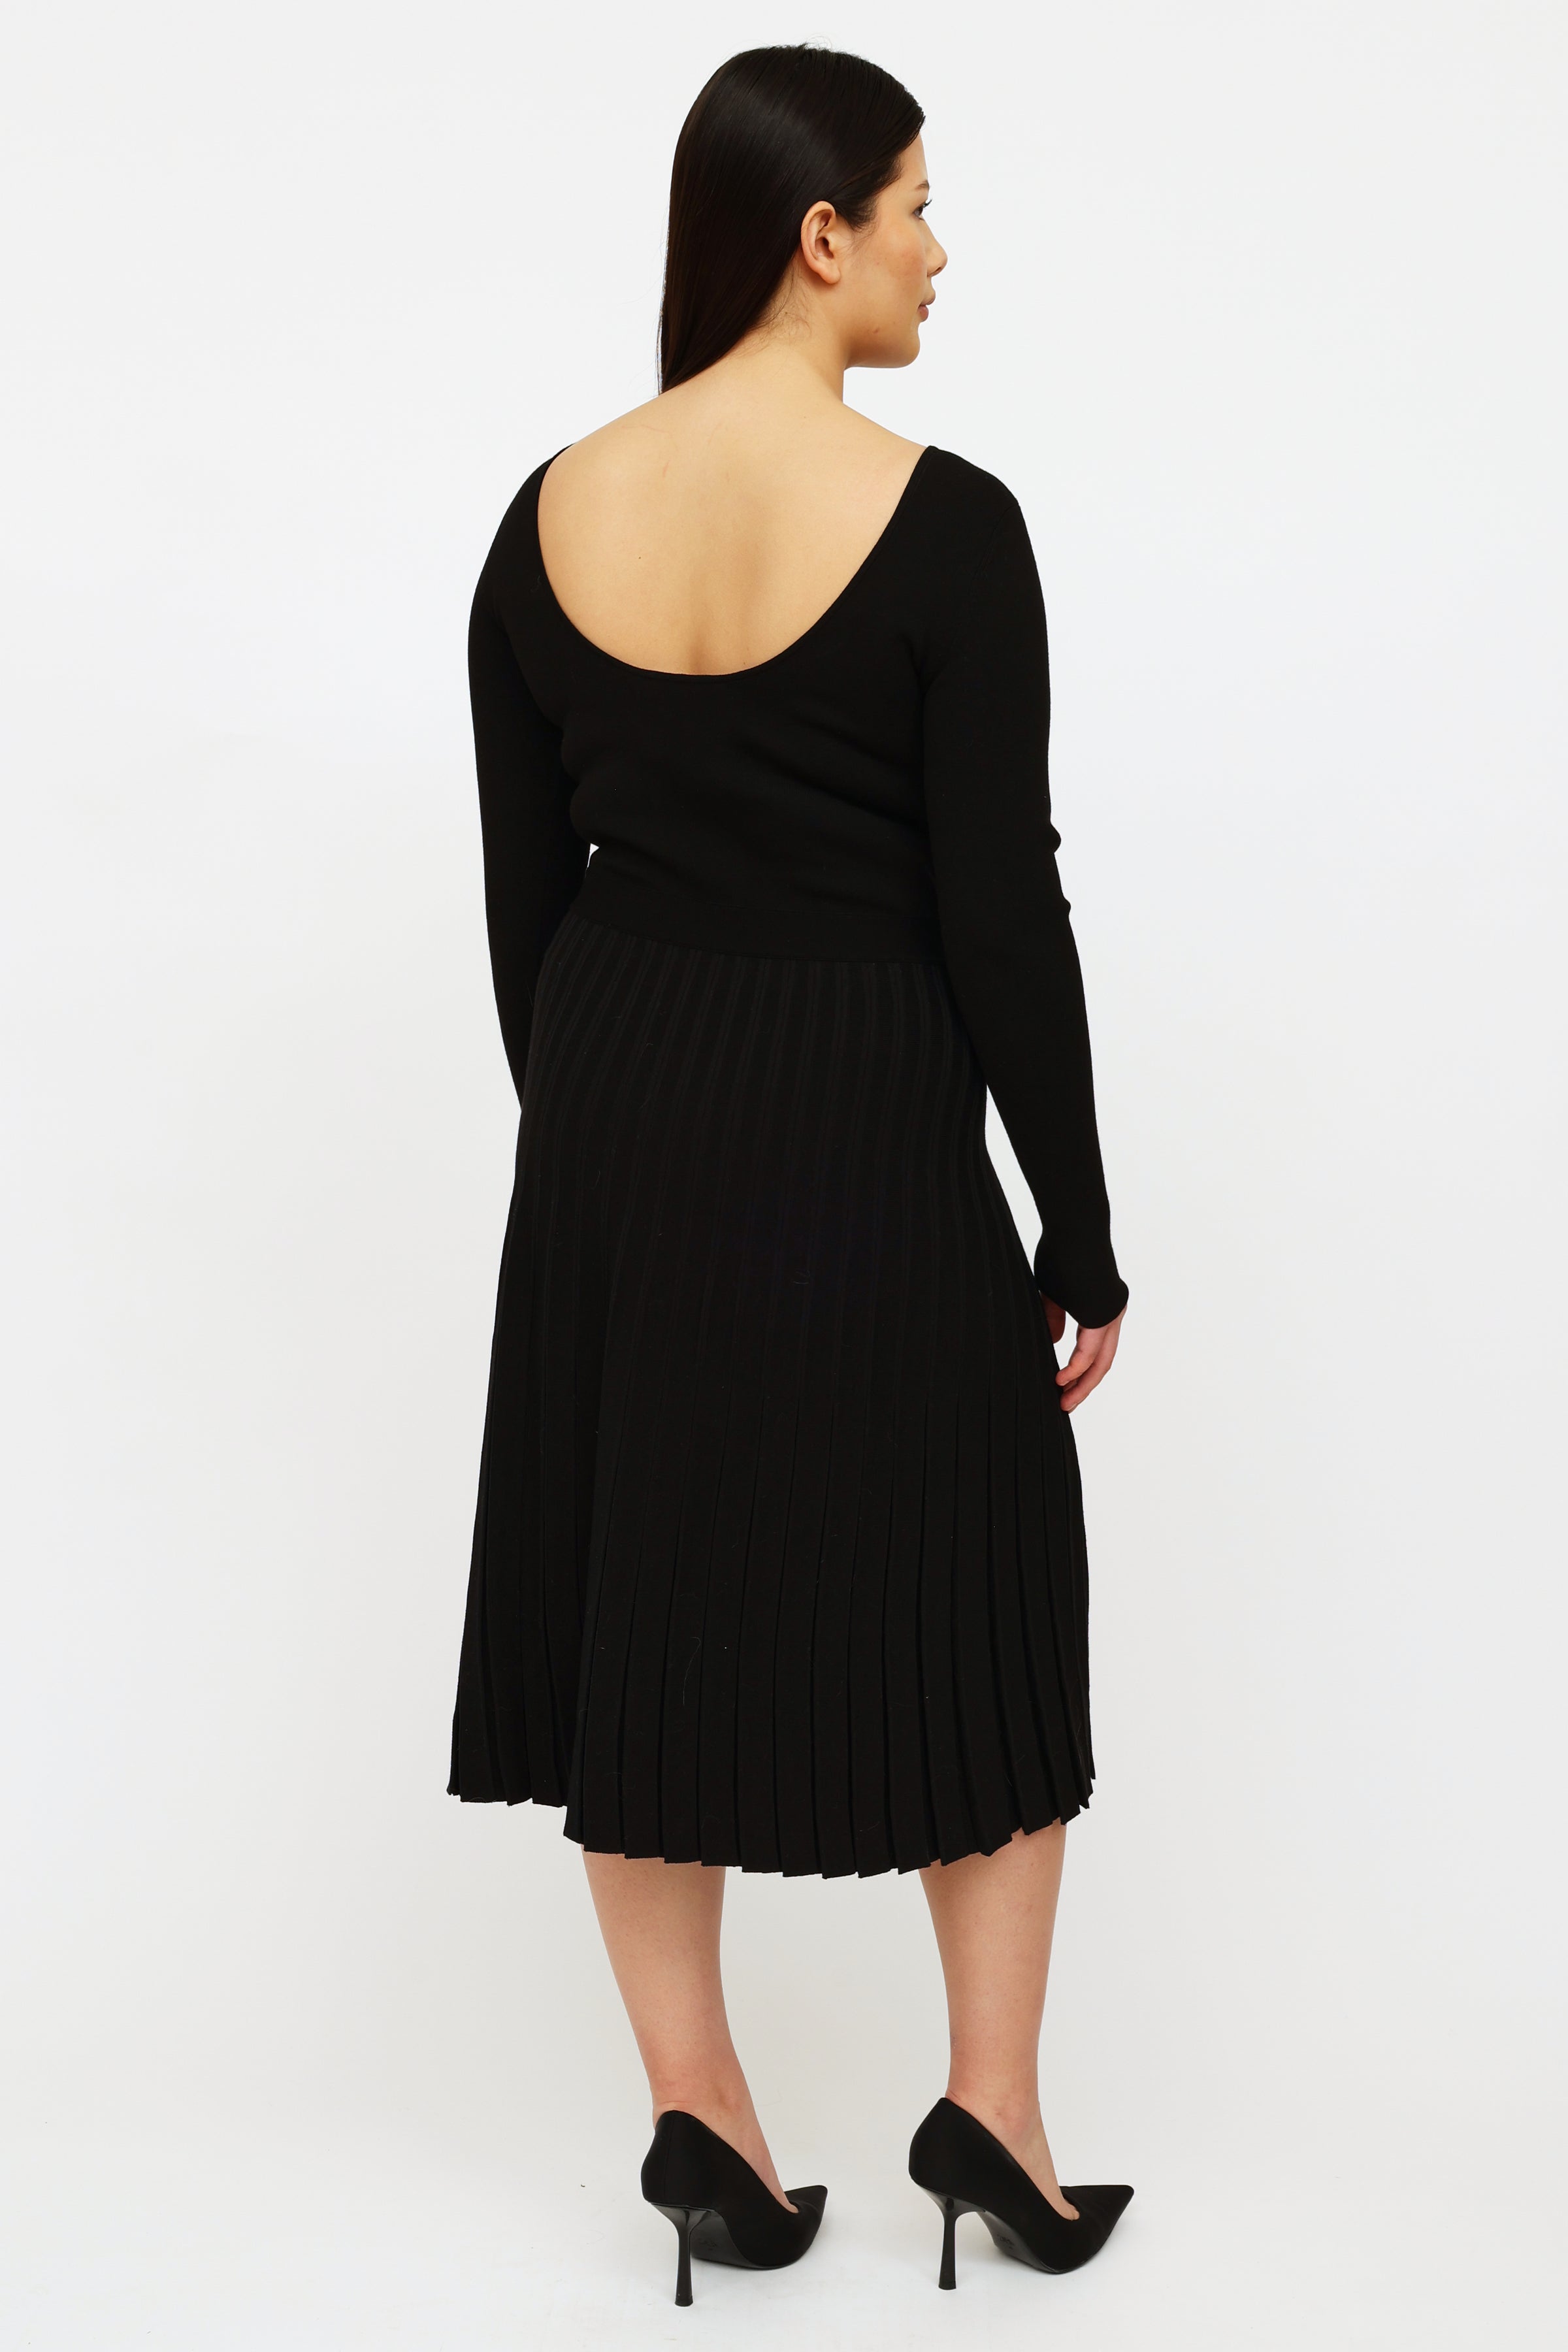 Tory Burch // Black Pleated Knit Dress – VSP Consignment